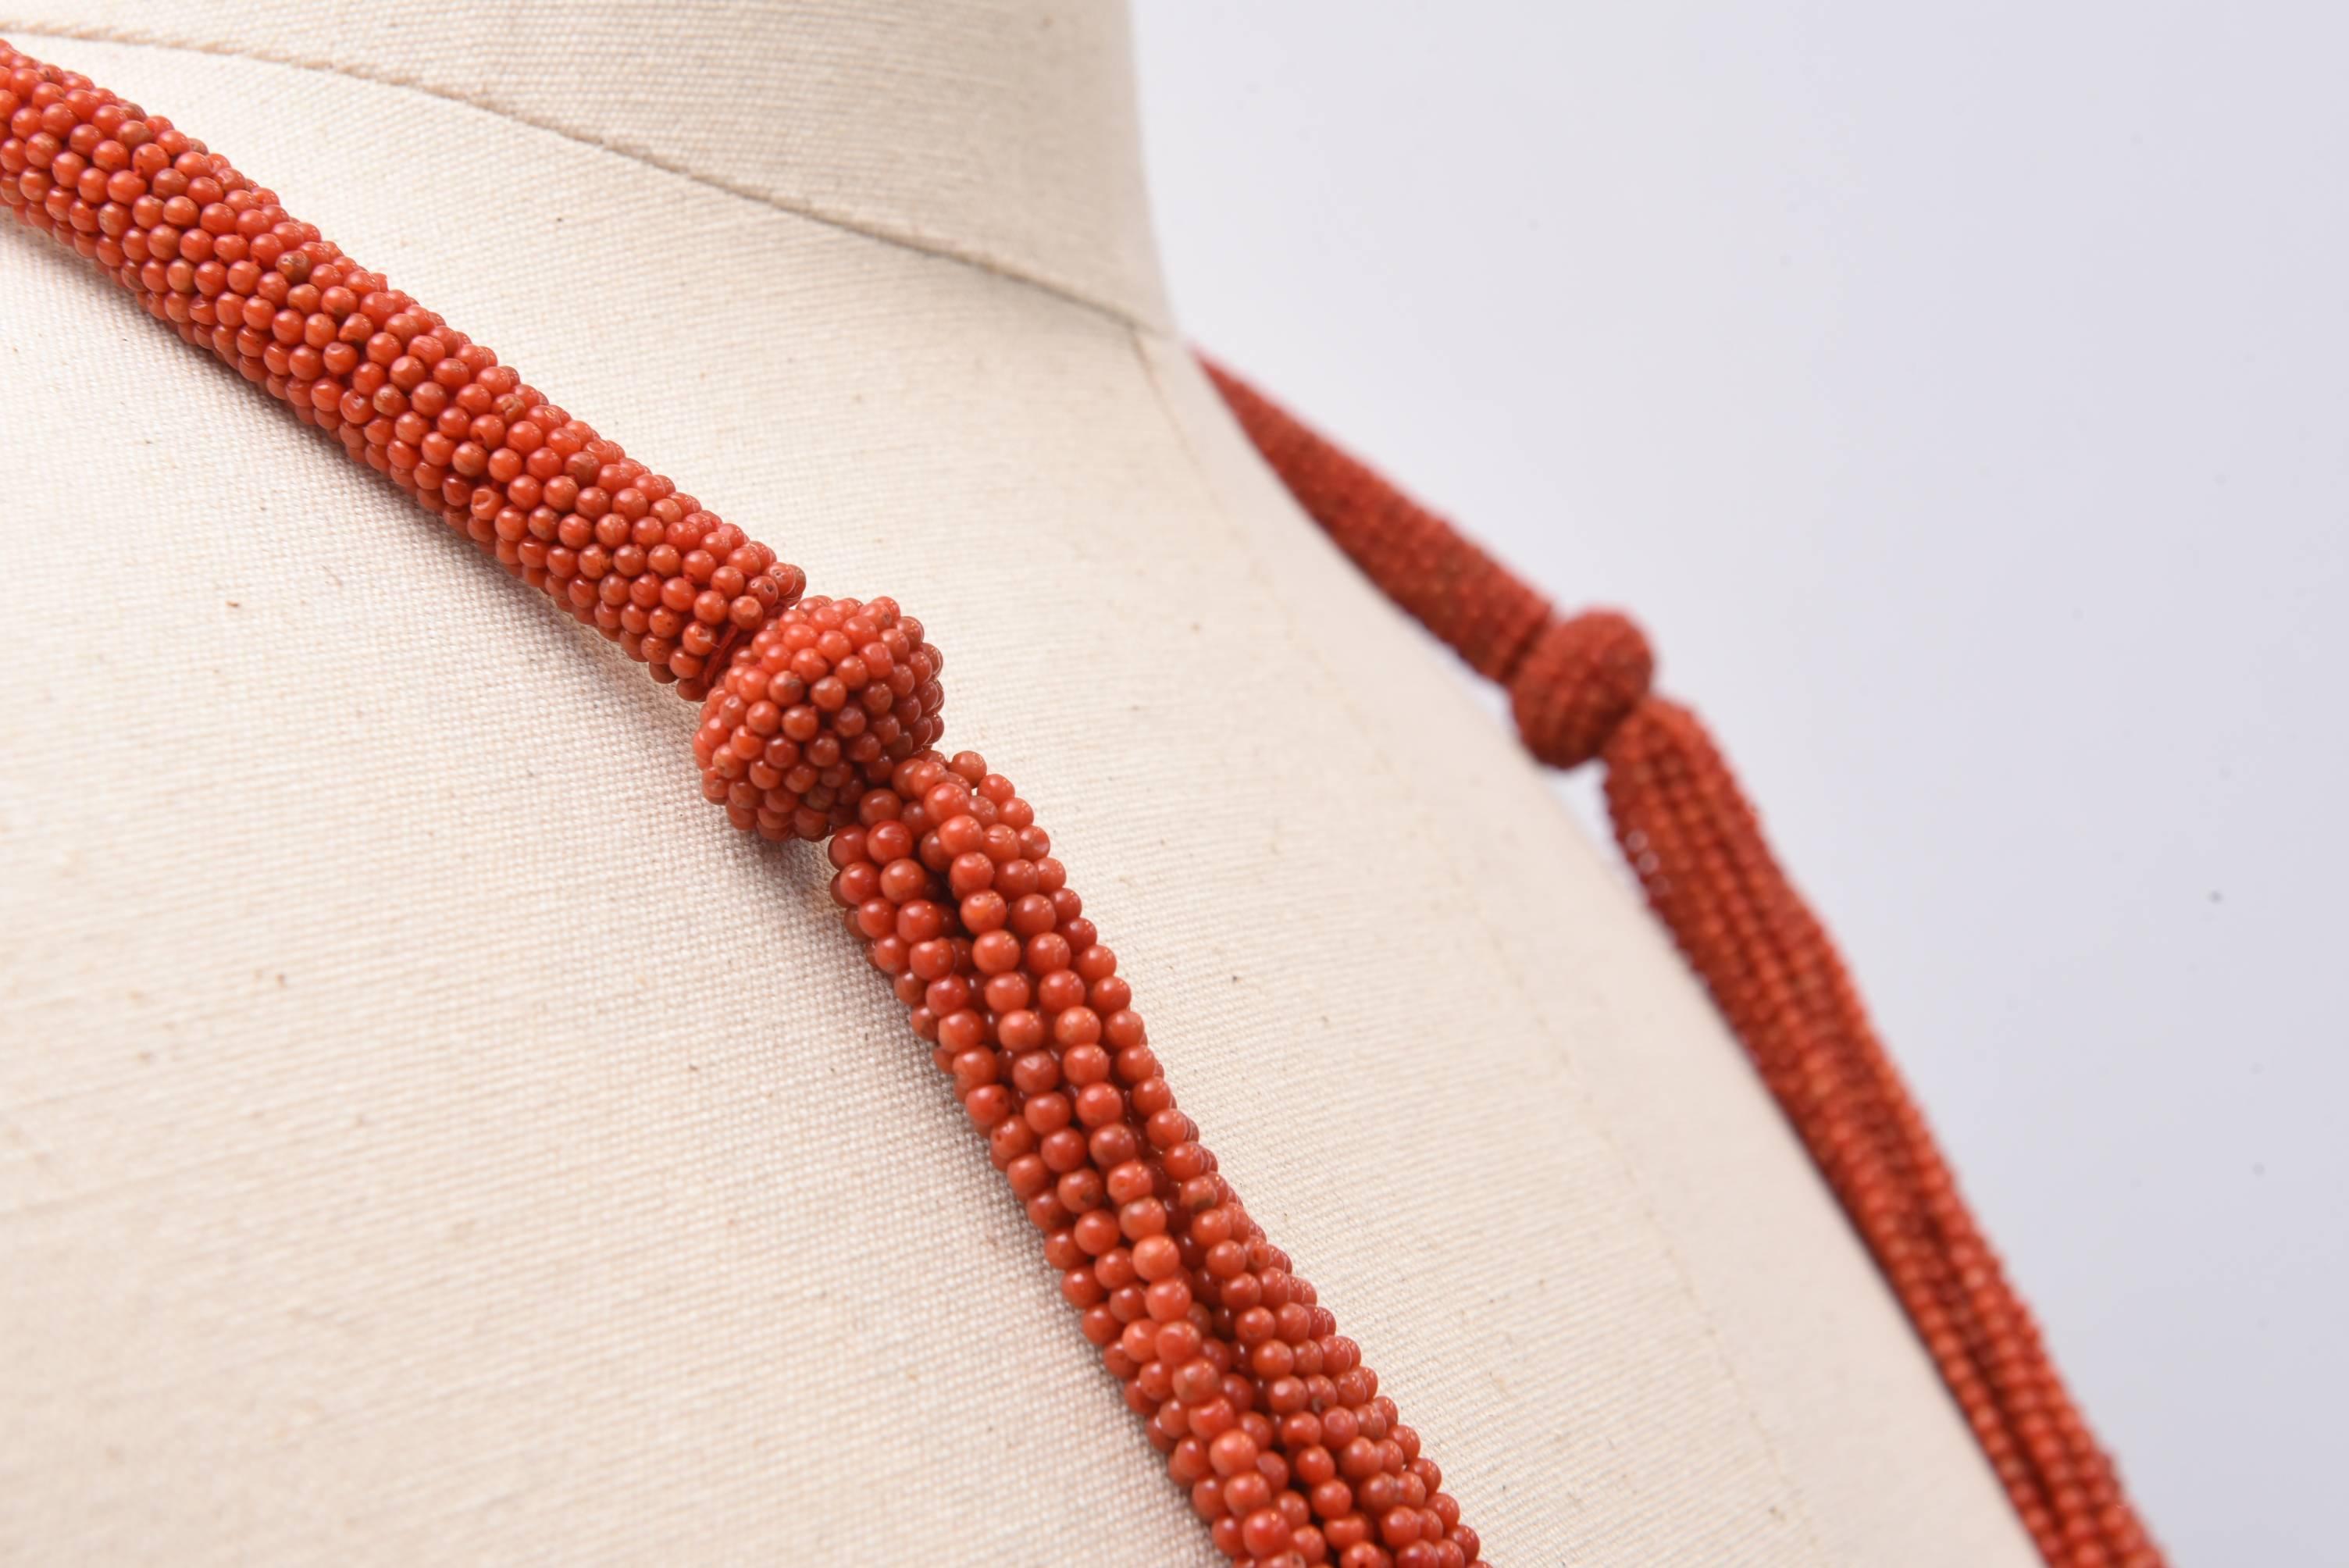 Hand-beaded 18 strand coral necklace with woven beads at collar bone and along the back.  Great length.  Length of just the strands is 21 inches.  Overall length is 36 inches.

The Lockhart Collection
Nantucket